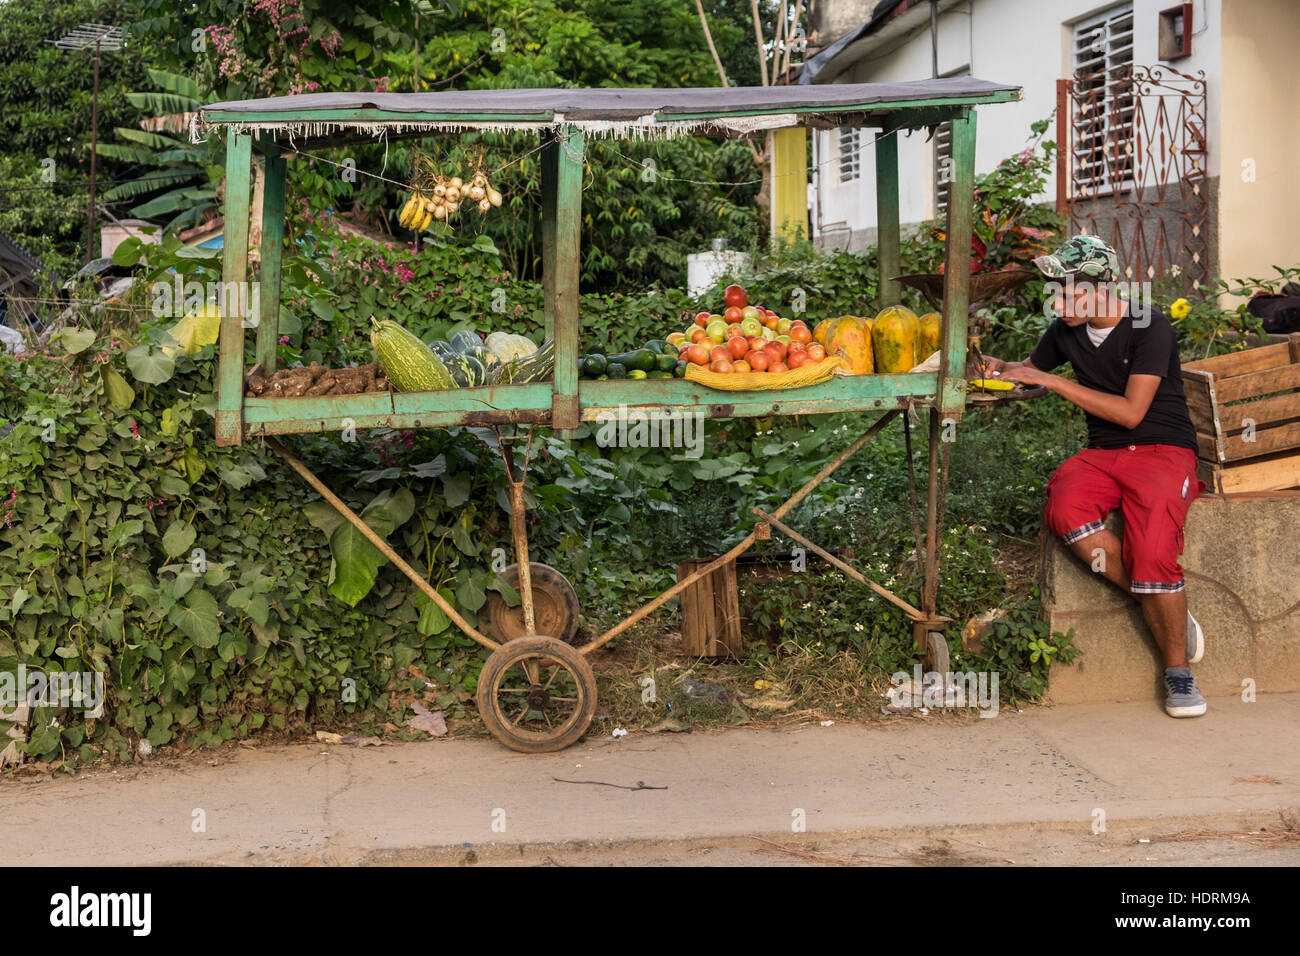 Vegetable stall at the roadside in Vinales, Cuba Stock Photo